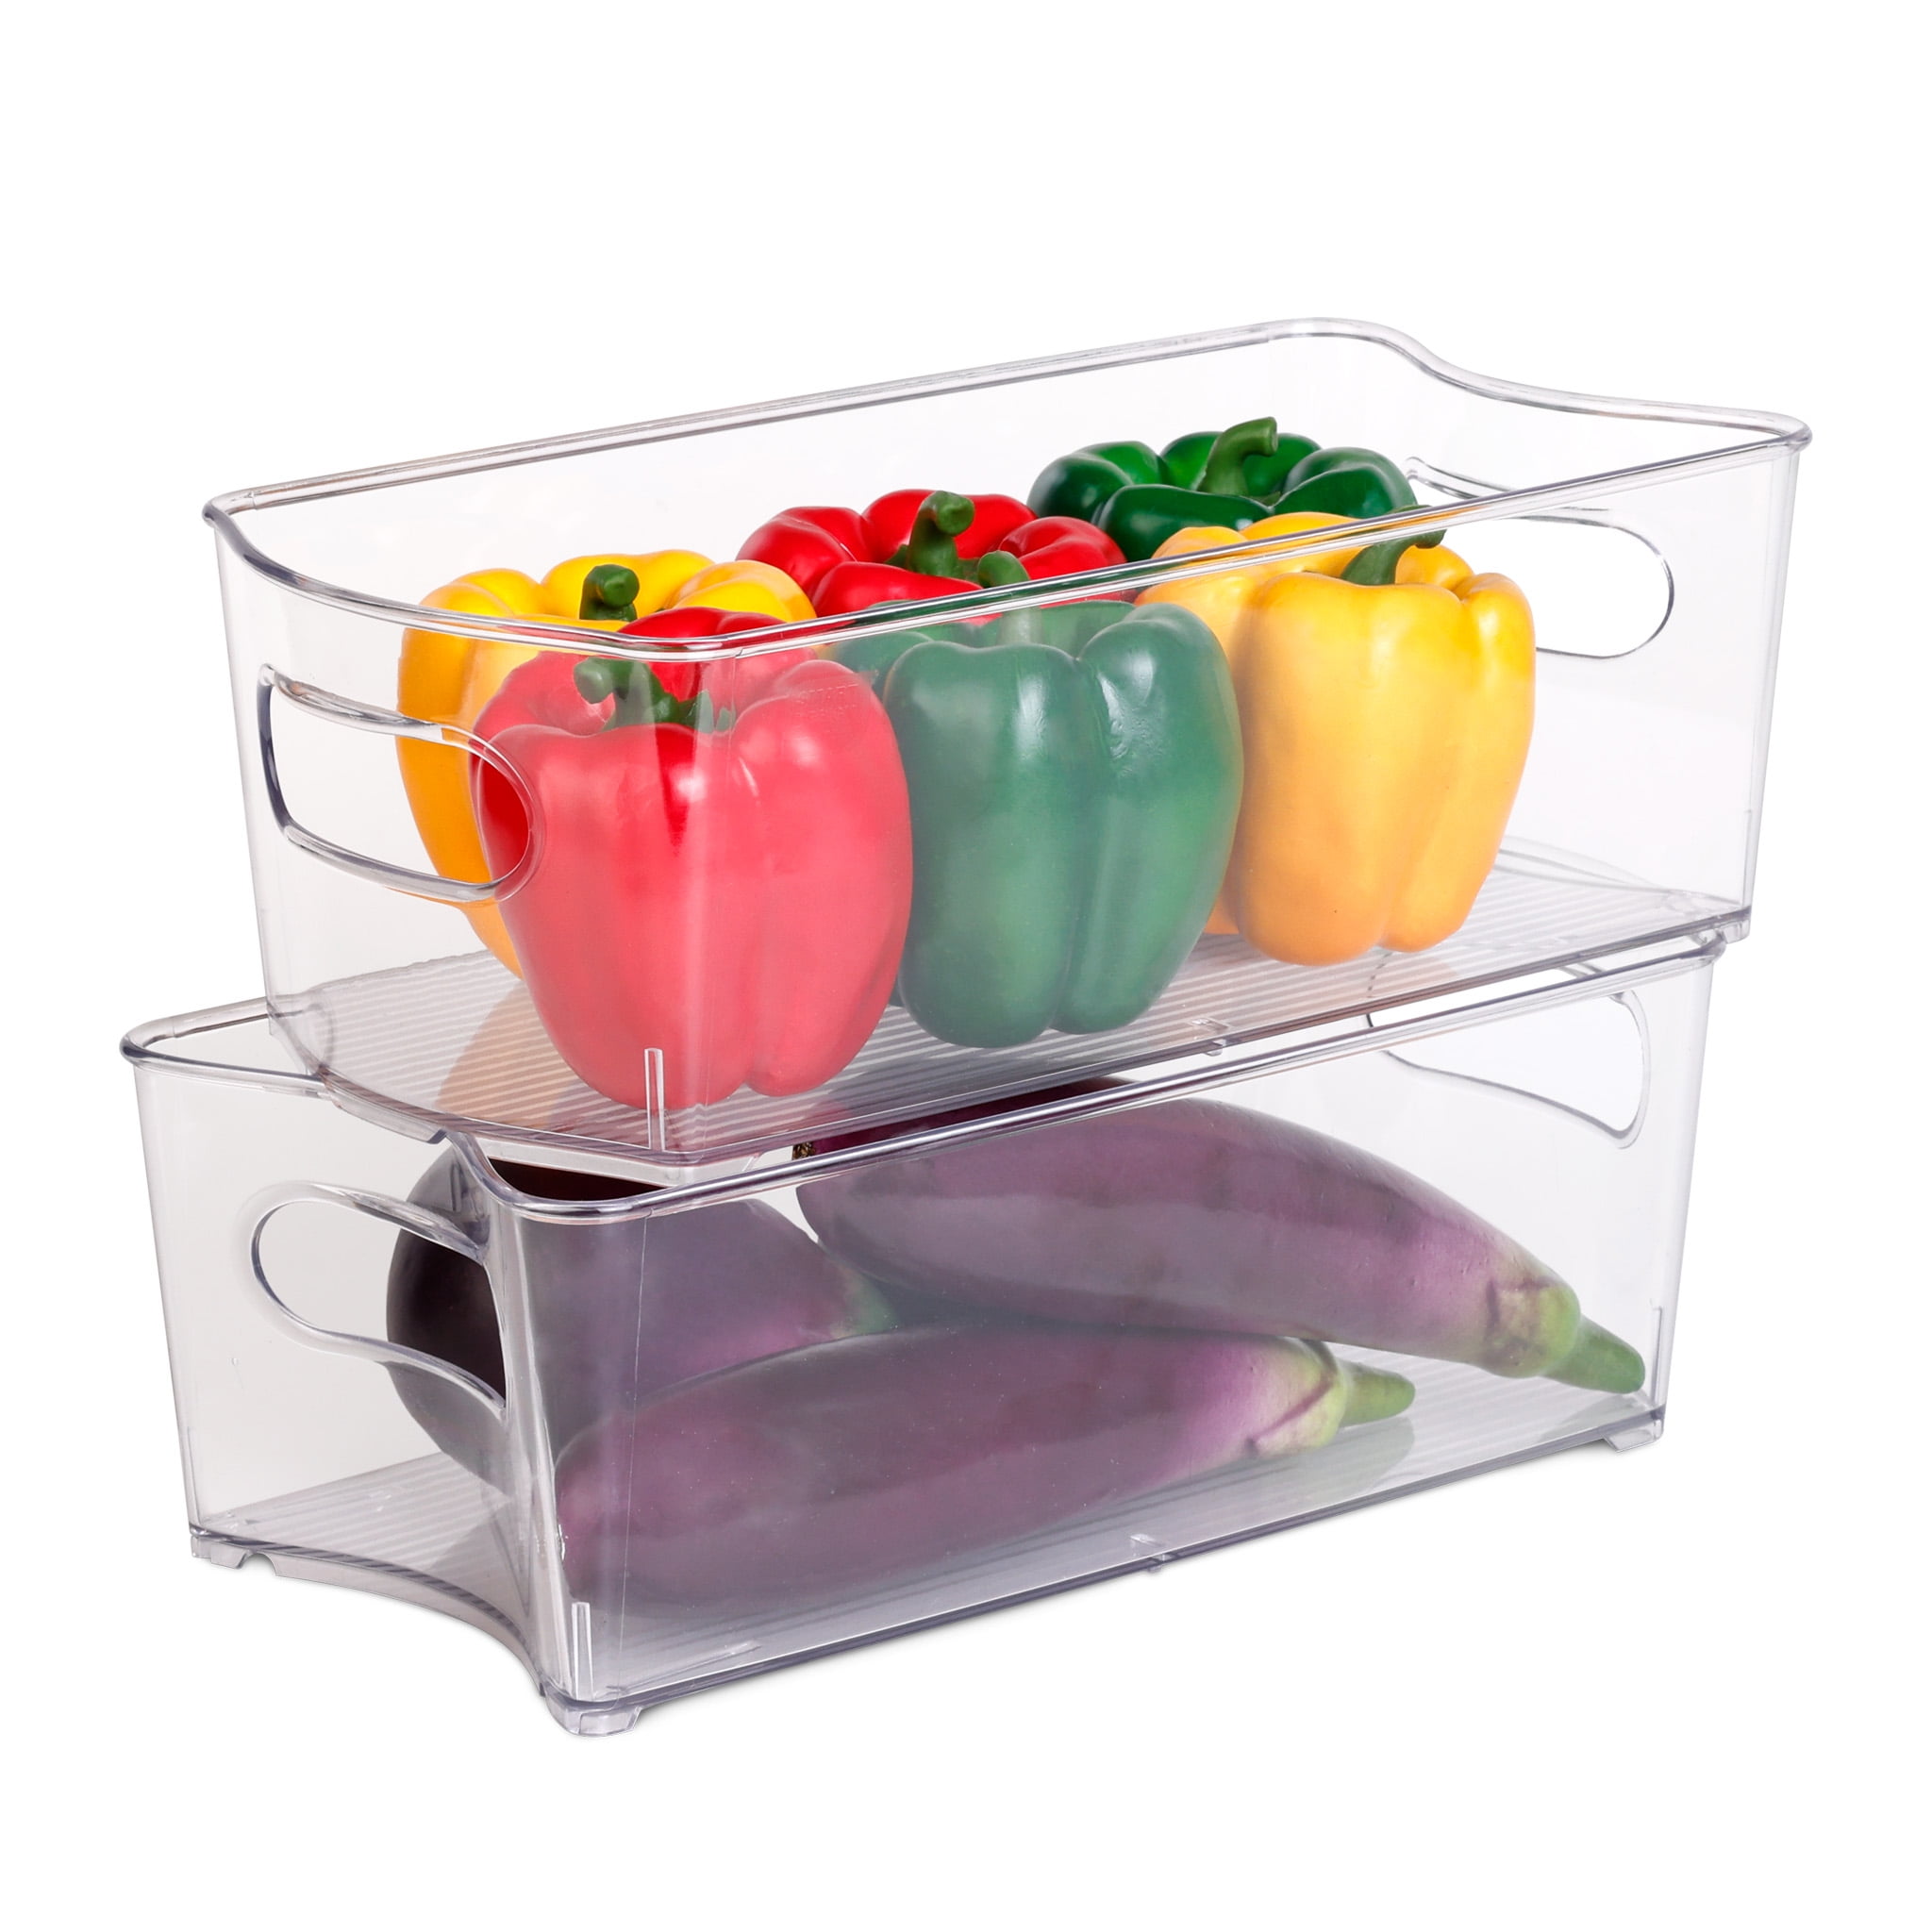 12-pack Clear Refrigerator Organizer Bins with Lids, Stackable